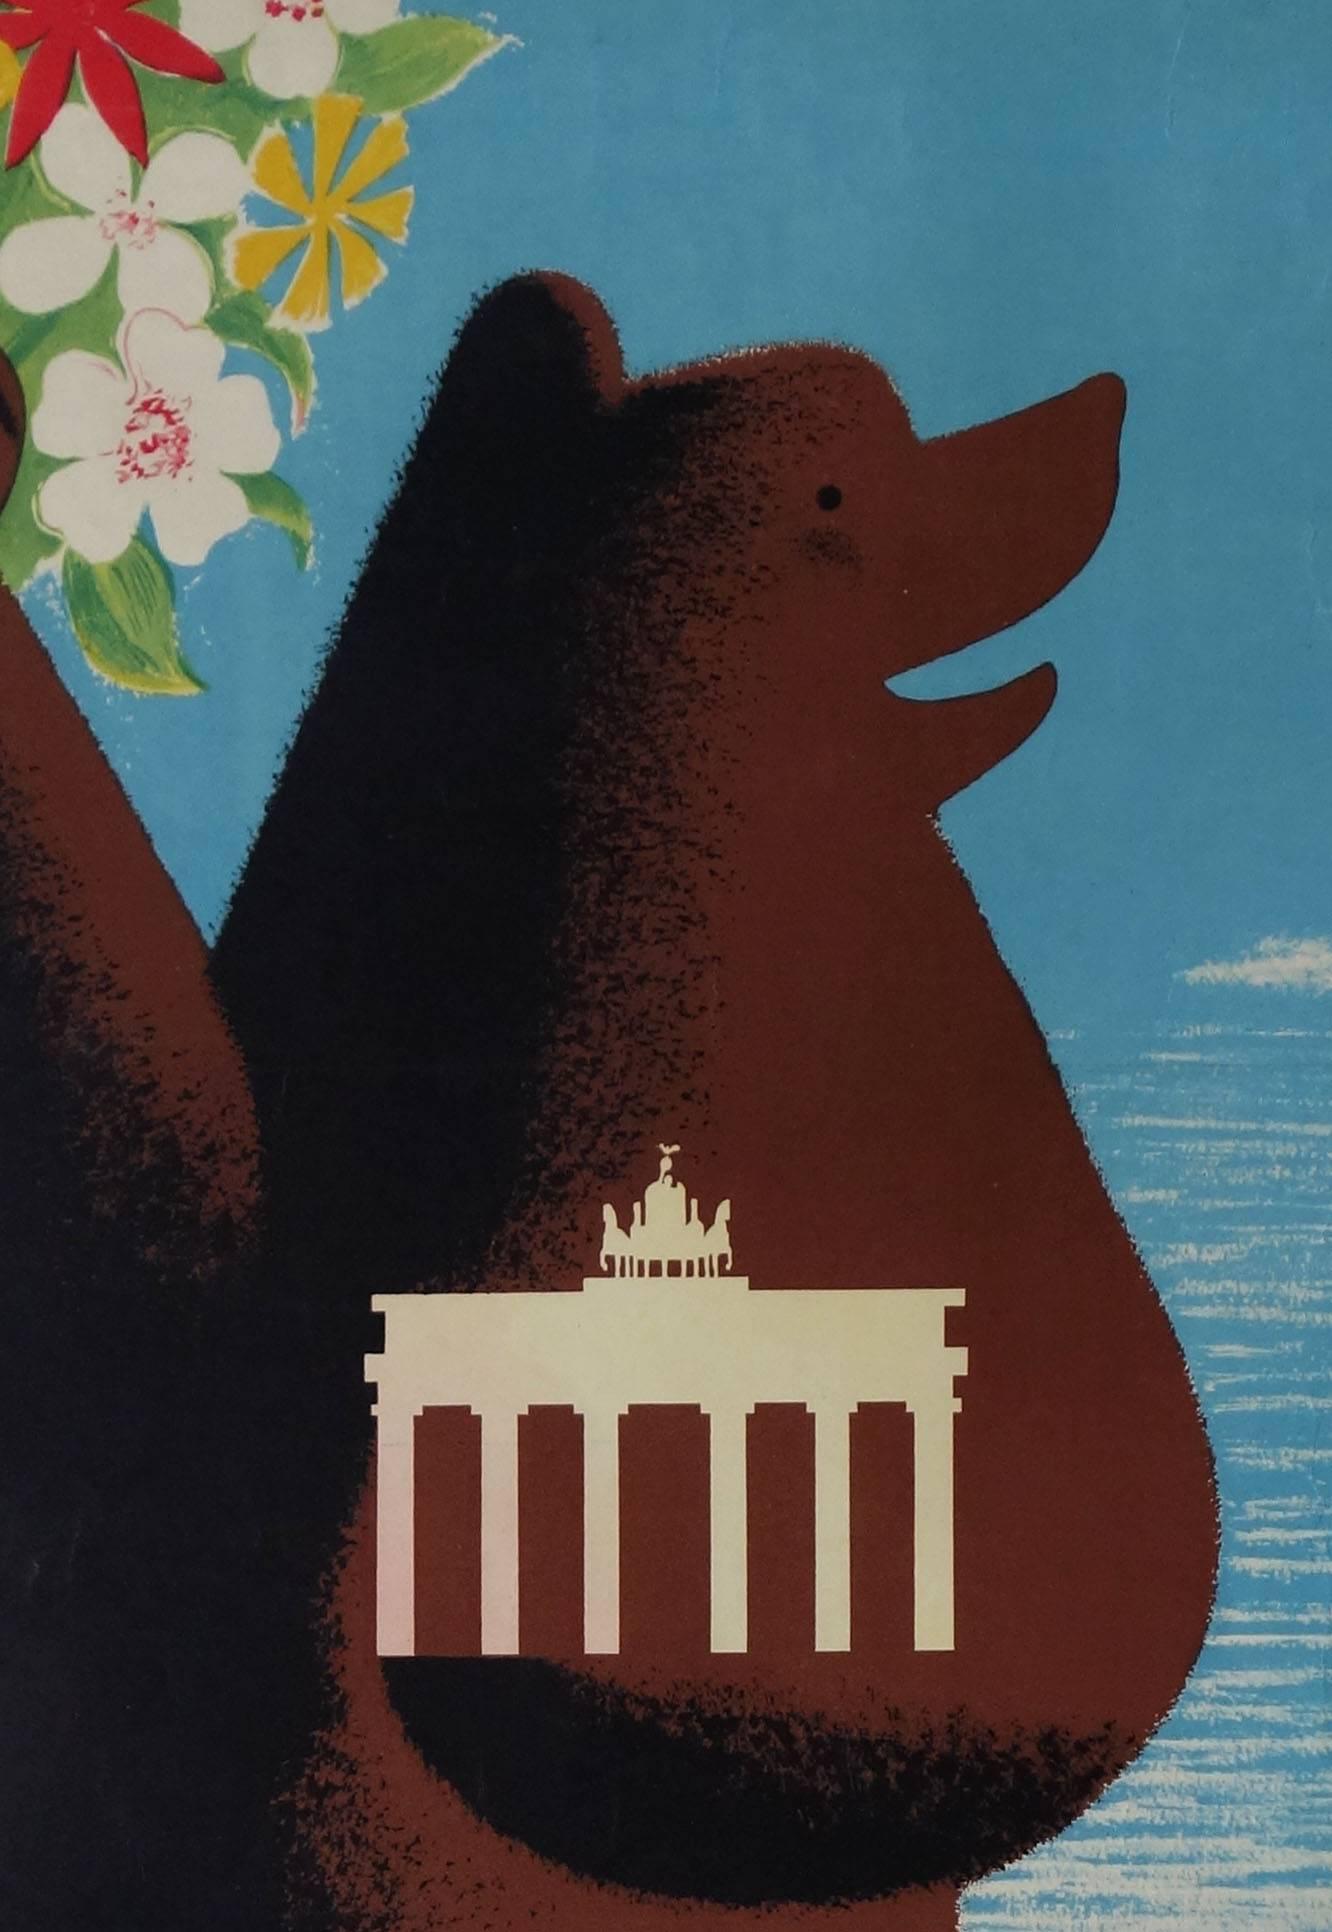 Vintage original travel poster (reading 'Berlin awaits its guests), published only shortly after the end of the second world war by E. Zander in Germany (1949) and designed by Alexander Wagner.

Several tears at the edges; creasing particularly in